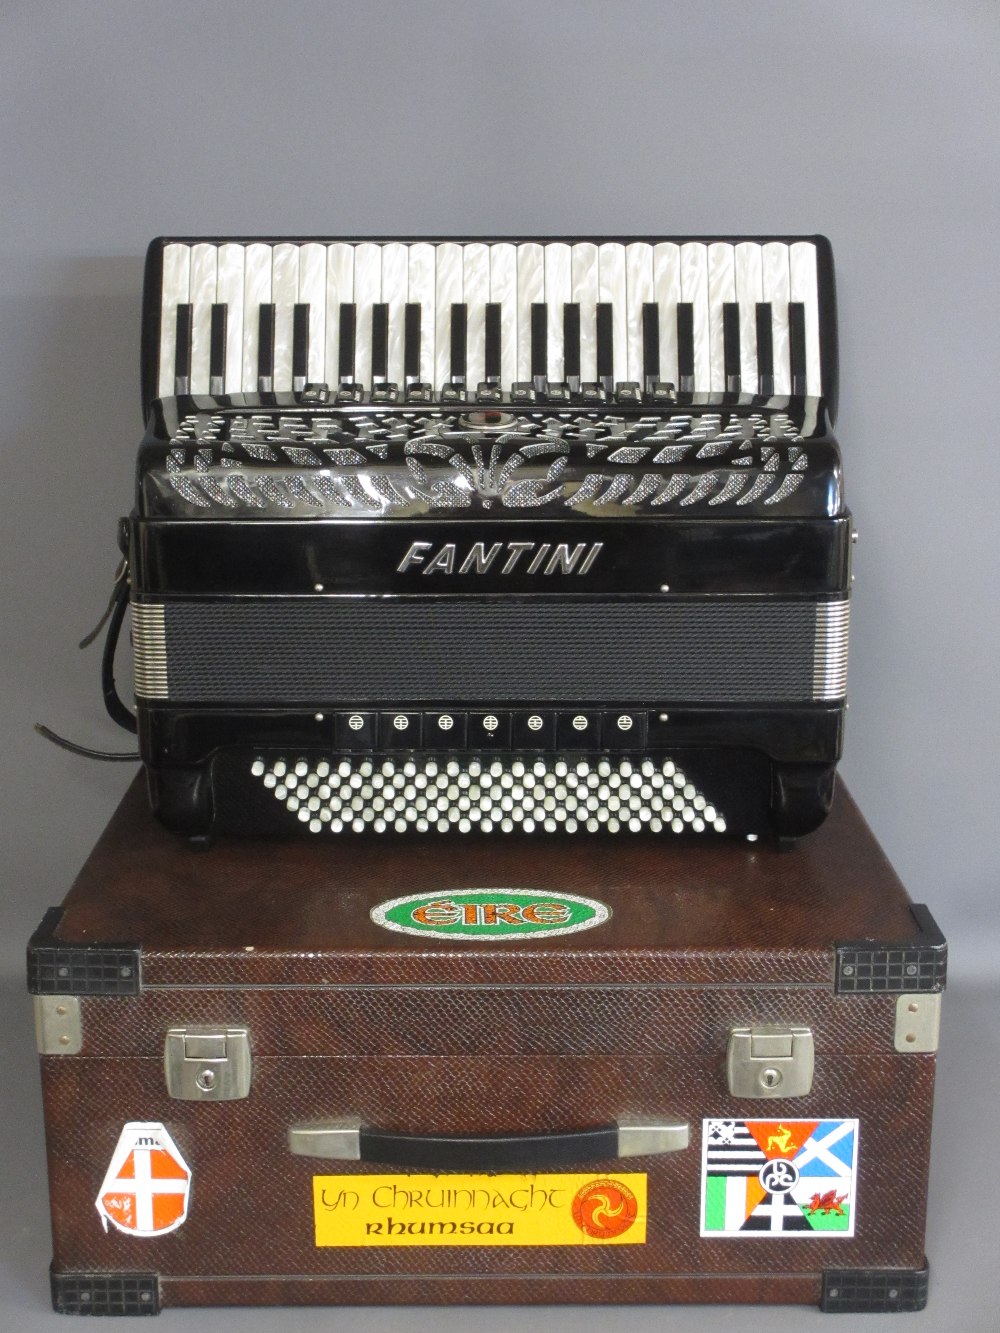 FANTINI PROFESSIONAL PIANO ACCORDION - in black, chrome and mother of pearl effect - Image 2 of 5